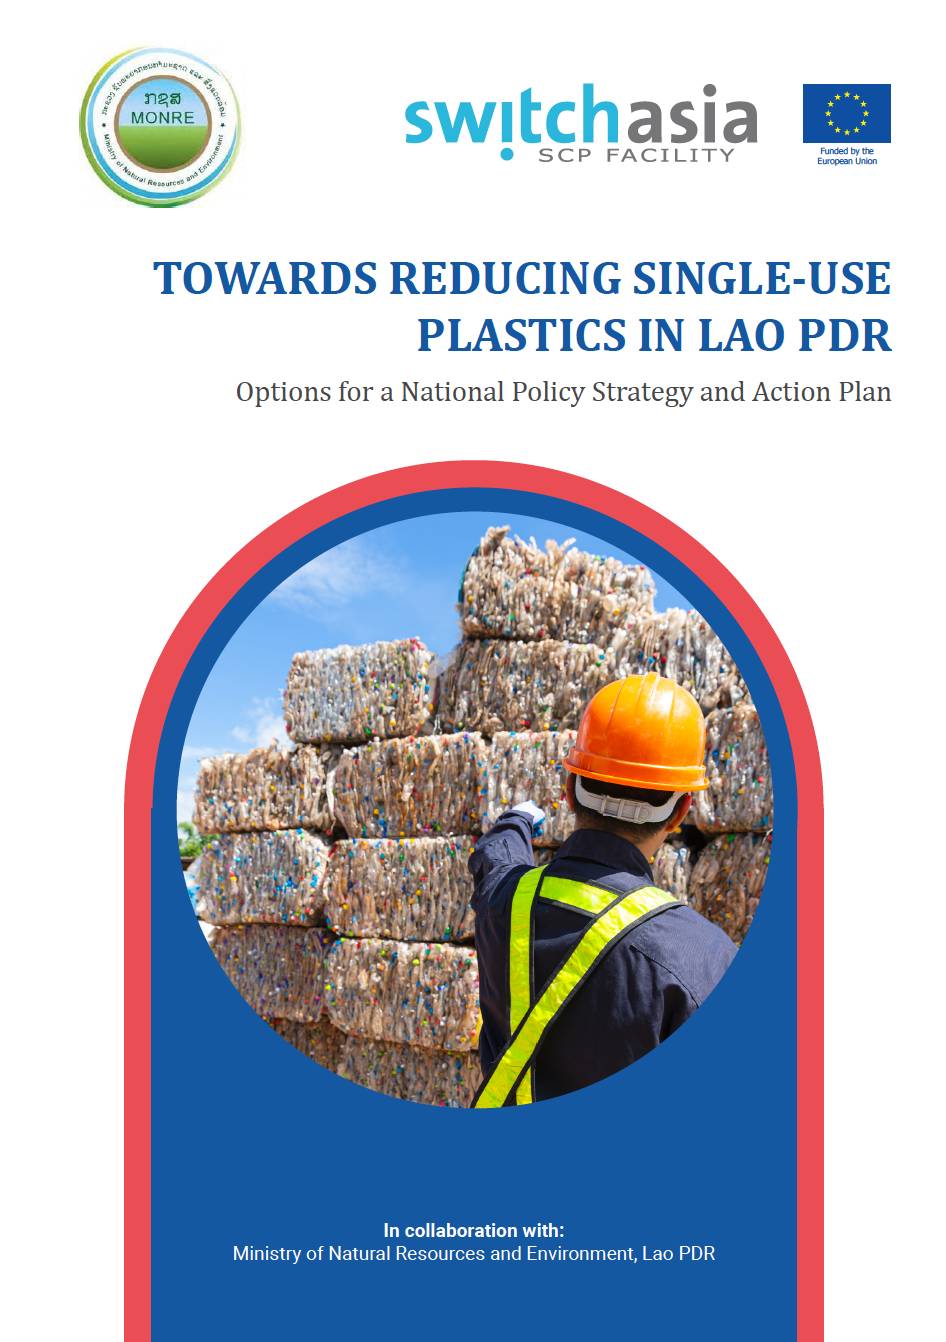 Towards Reducing Single-use Plastics in Lao PDR